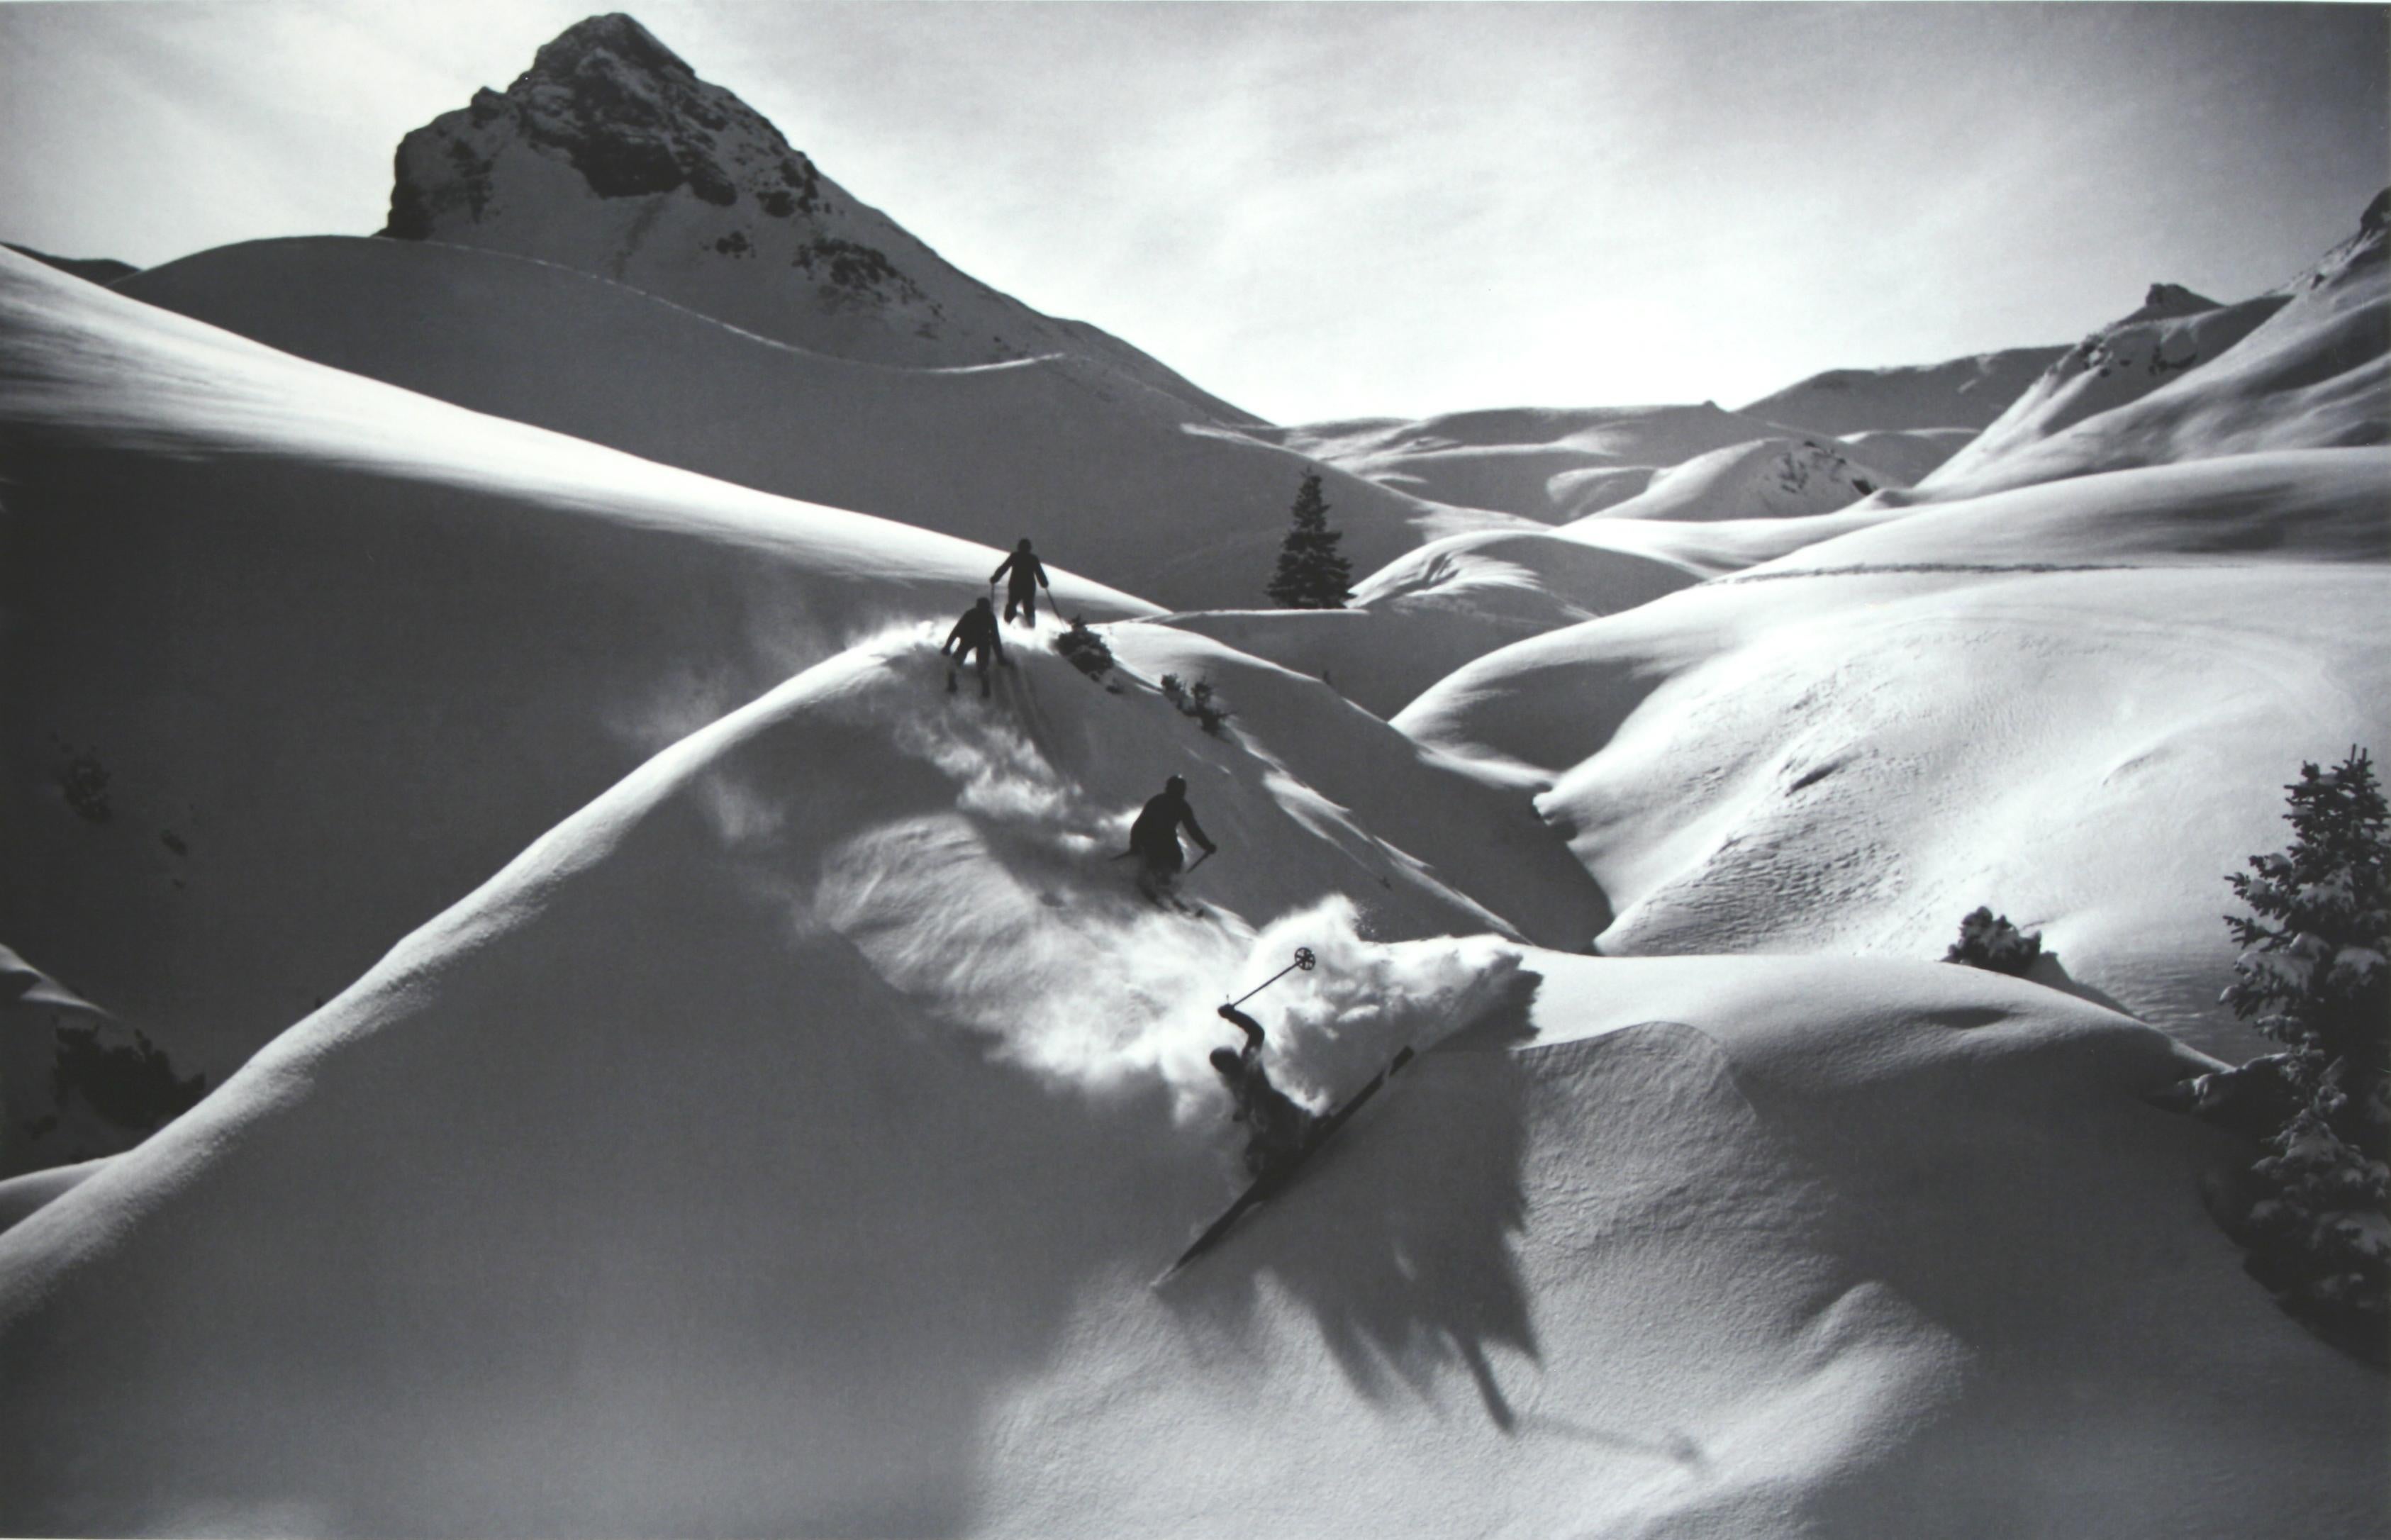 Alpine Ski photograph.
'VIRGIN POWDER', a new mounted black and white photographic image after an original 1930s skiing photograph. Black and white alpine photos are the perfect addition to any home or ski lodge. Prior to being a recreational